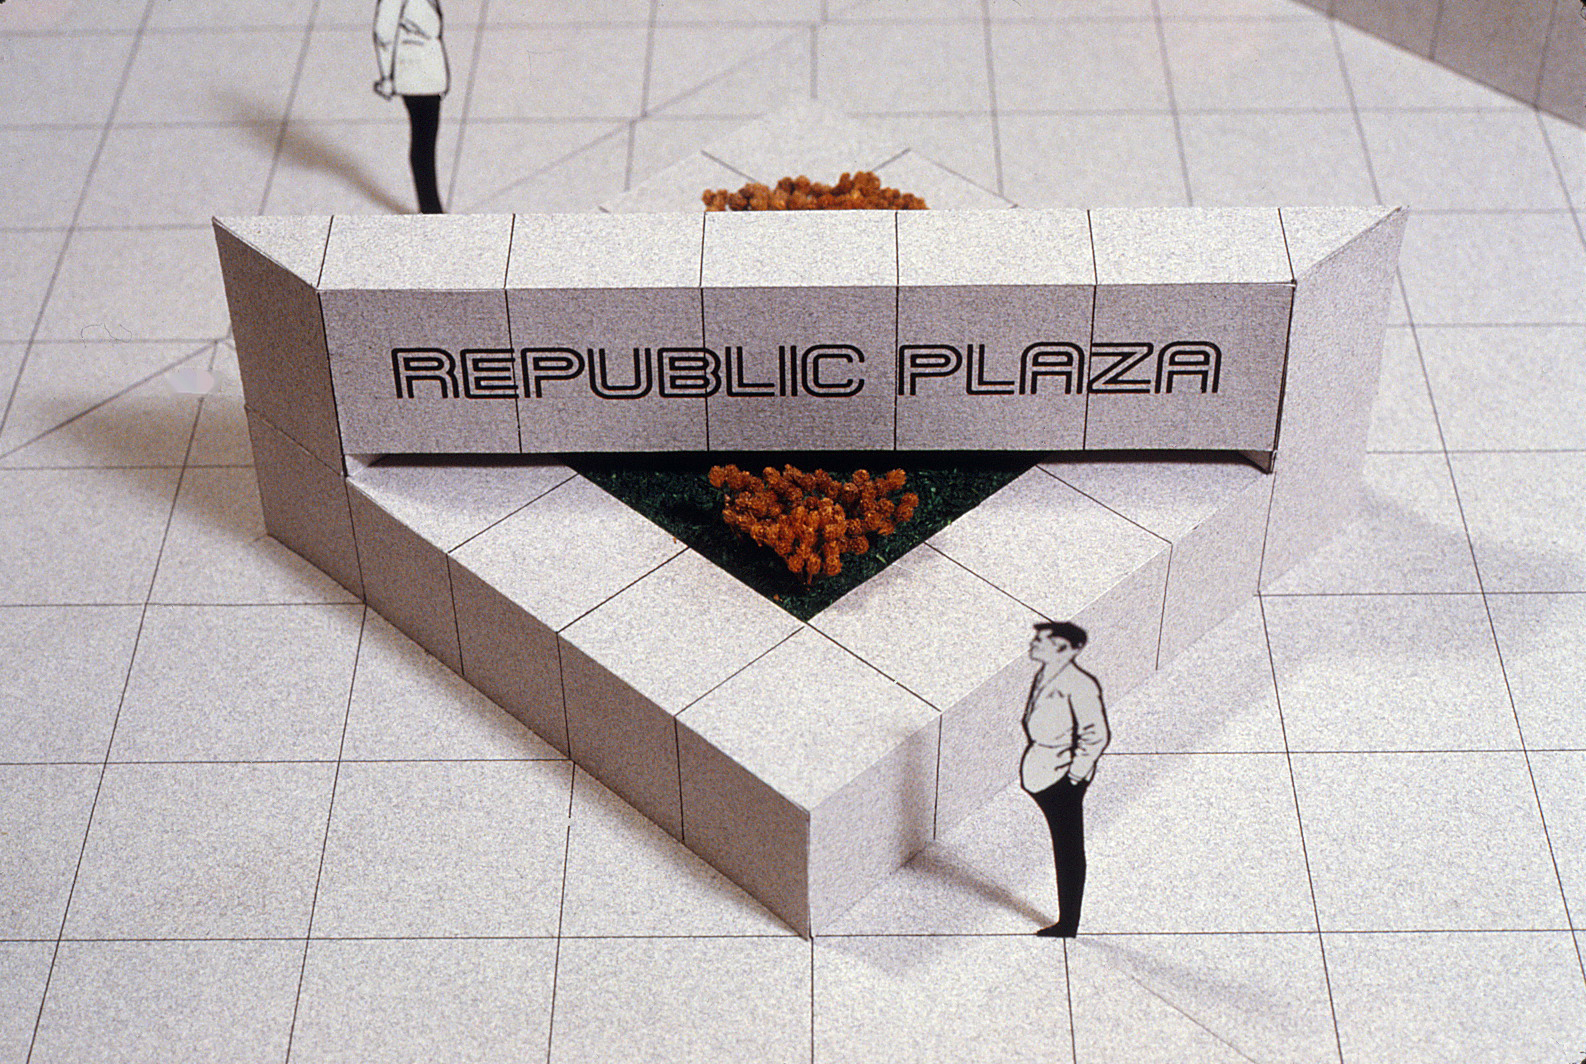 Drawing of the planned street corner planter with Republic Plaza written in stone above it.